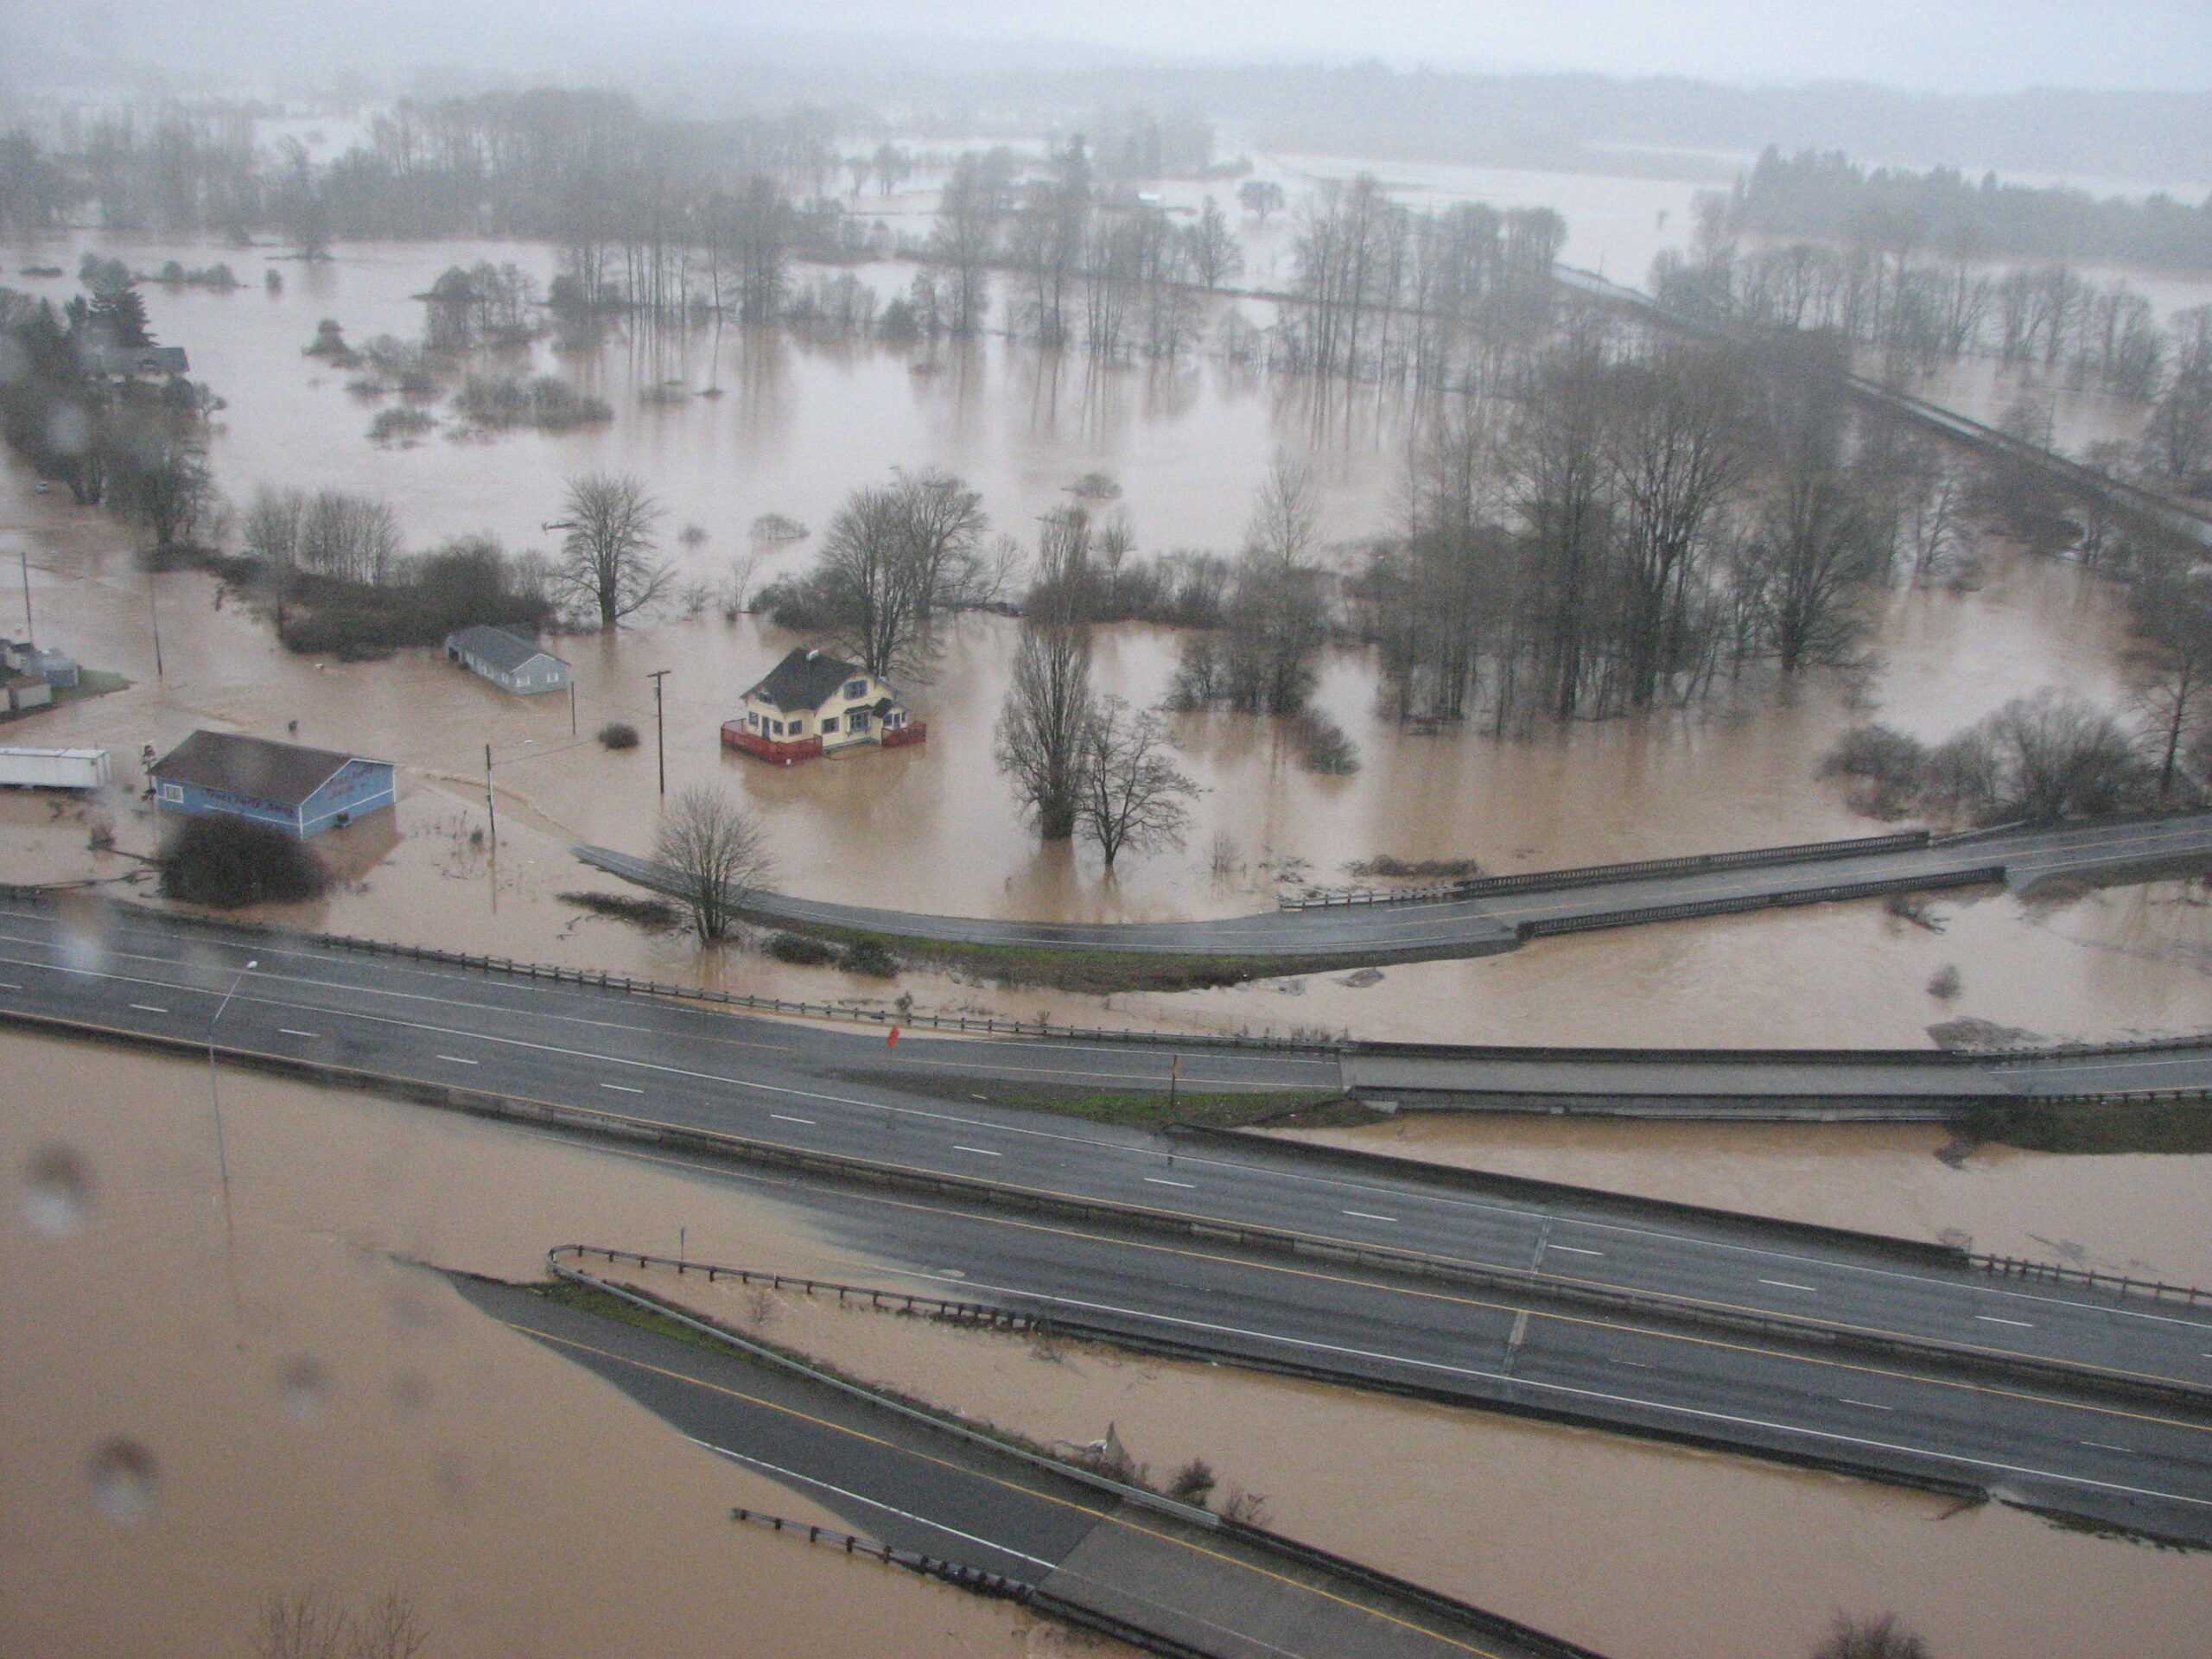 An aerial view of flooding in the Chehalis Basin, with a submerged highway and flooded homes.